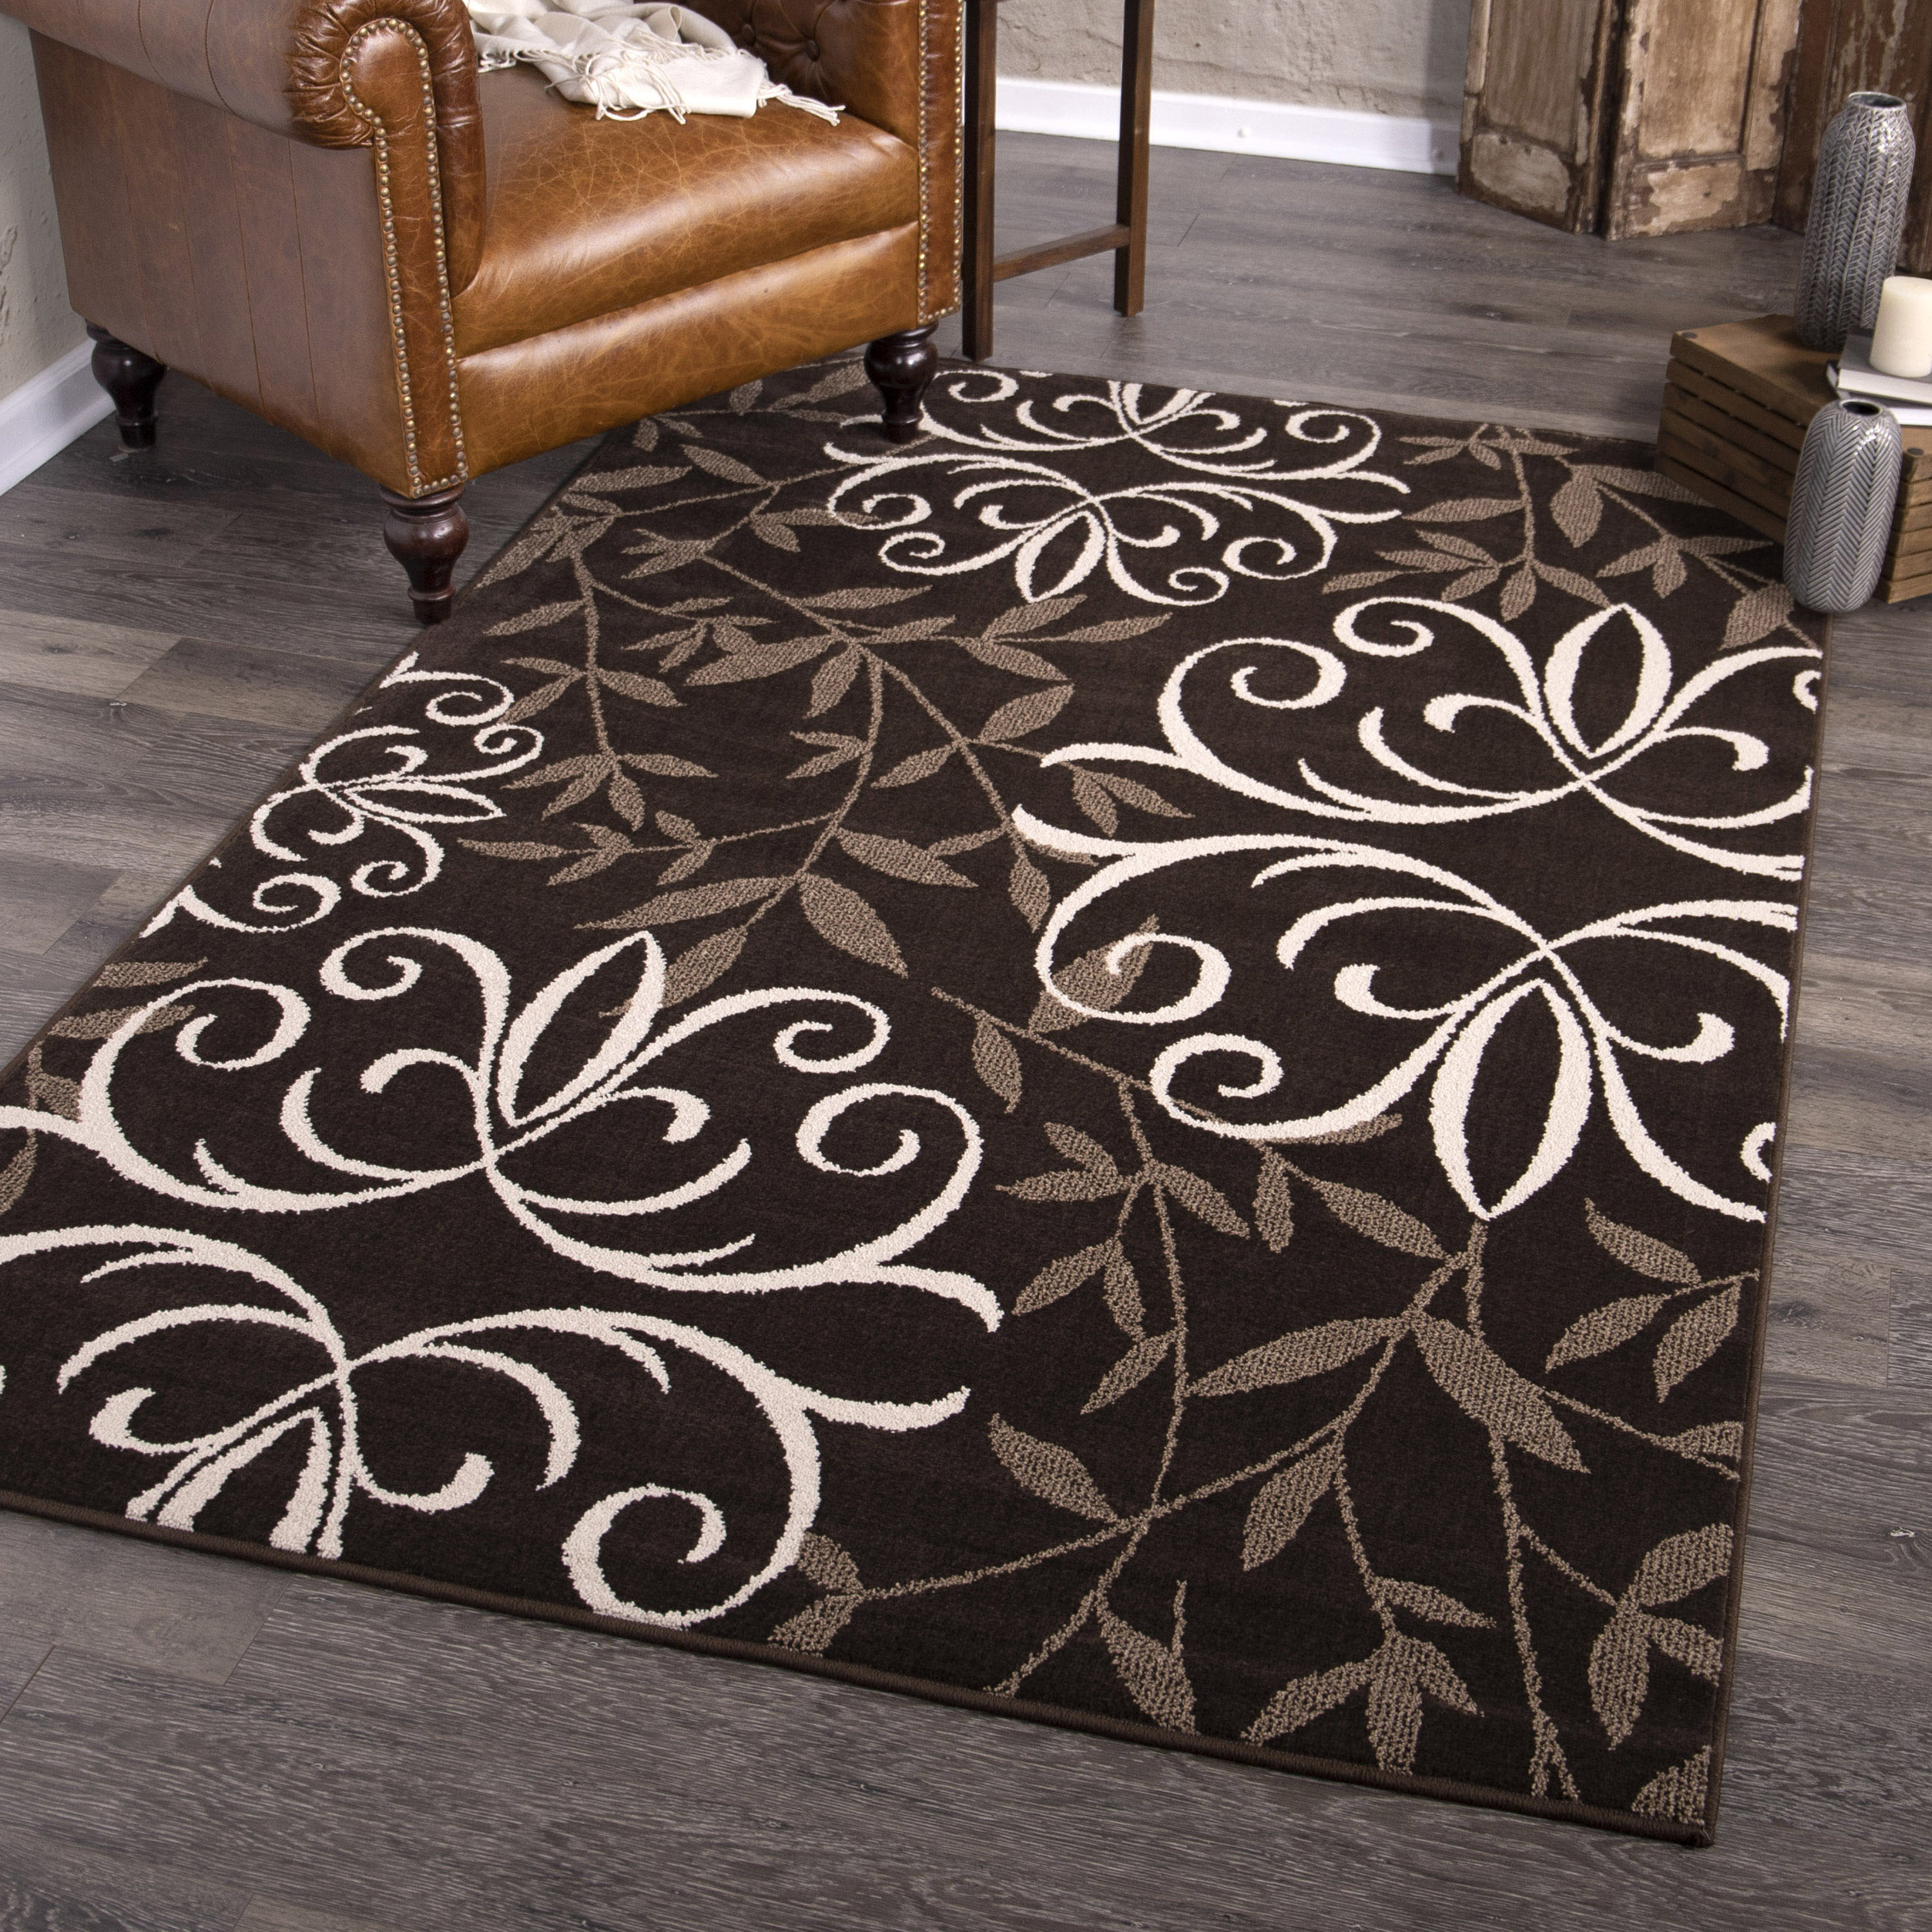 Better Homes & Gardens Iron Fleur Area Rug, Brown, 3'11" x 5'5" - image 1 of 10